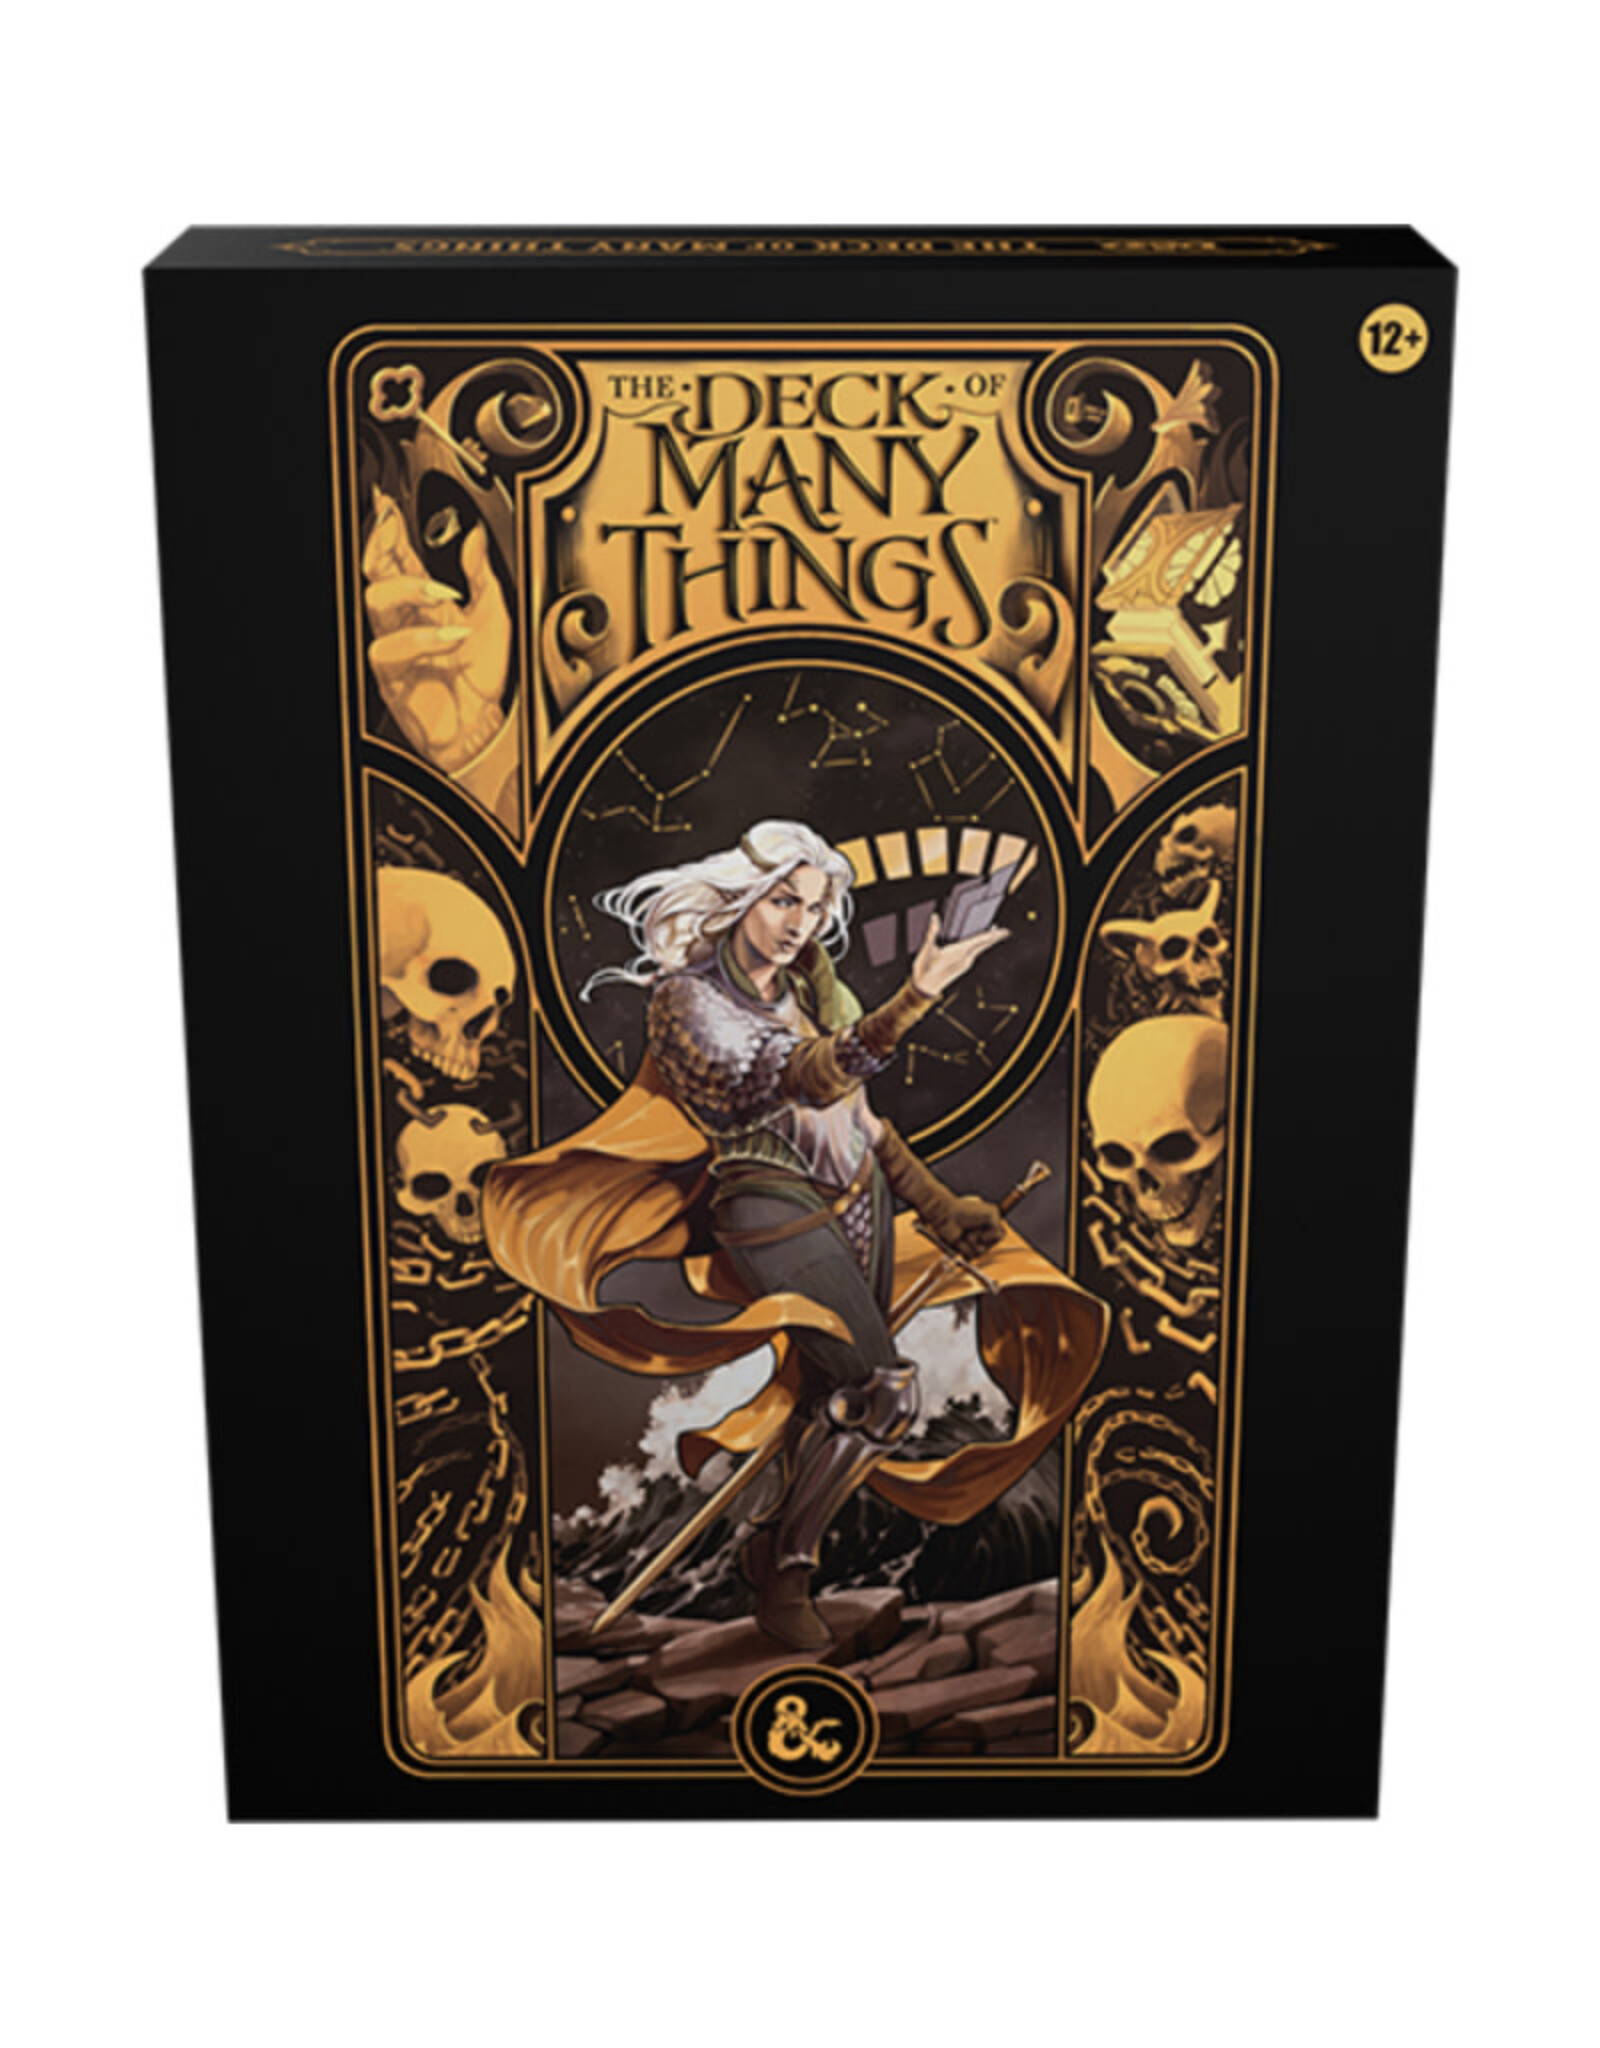 D&D delays Deck of Many Things release due to extensive